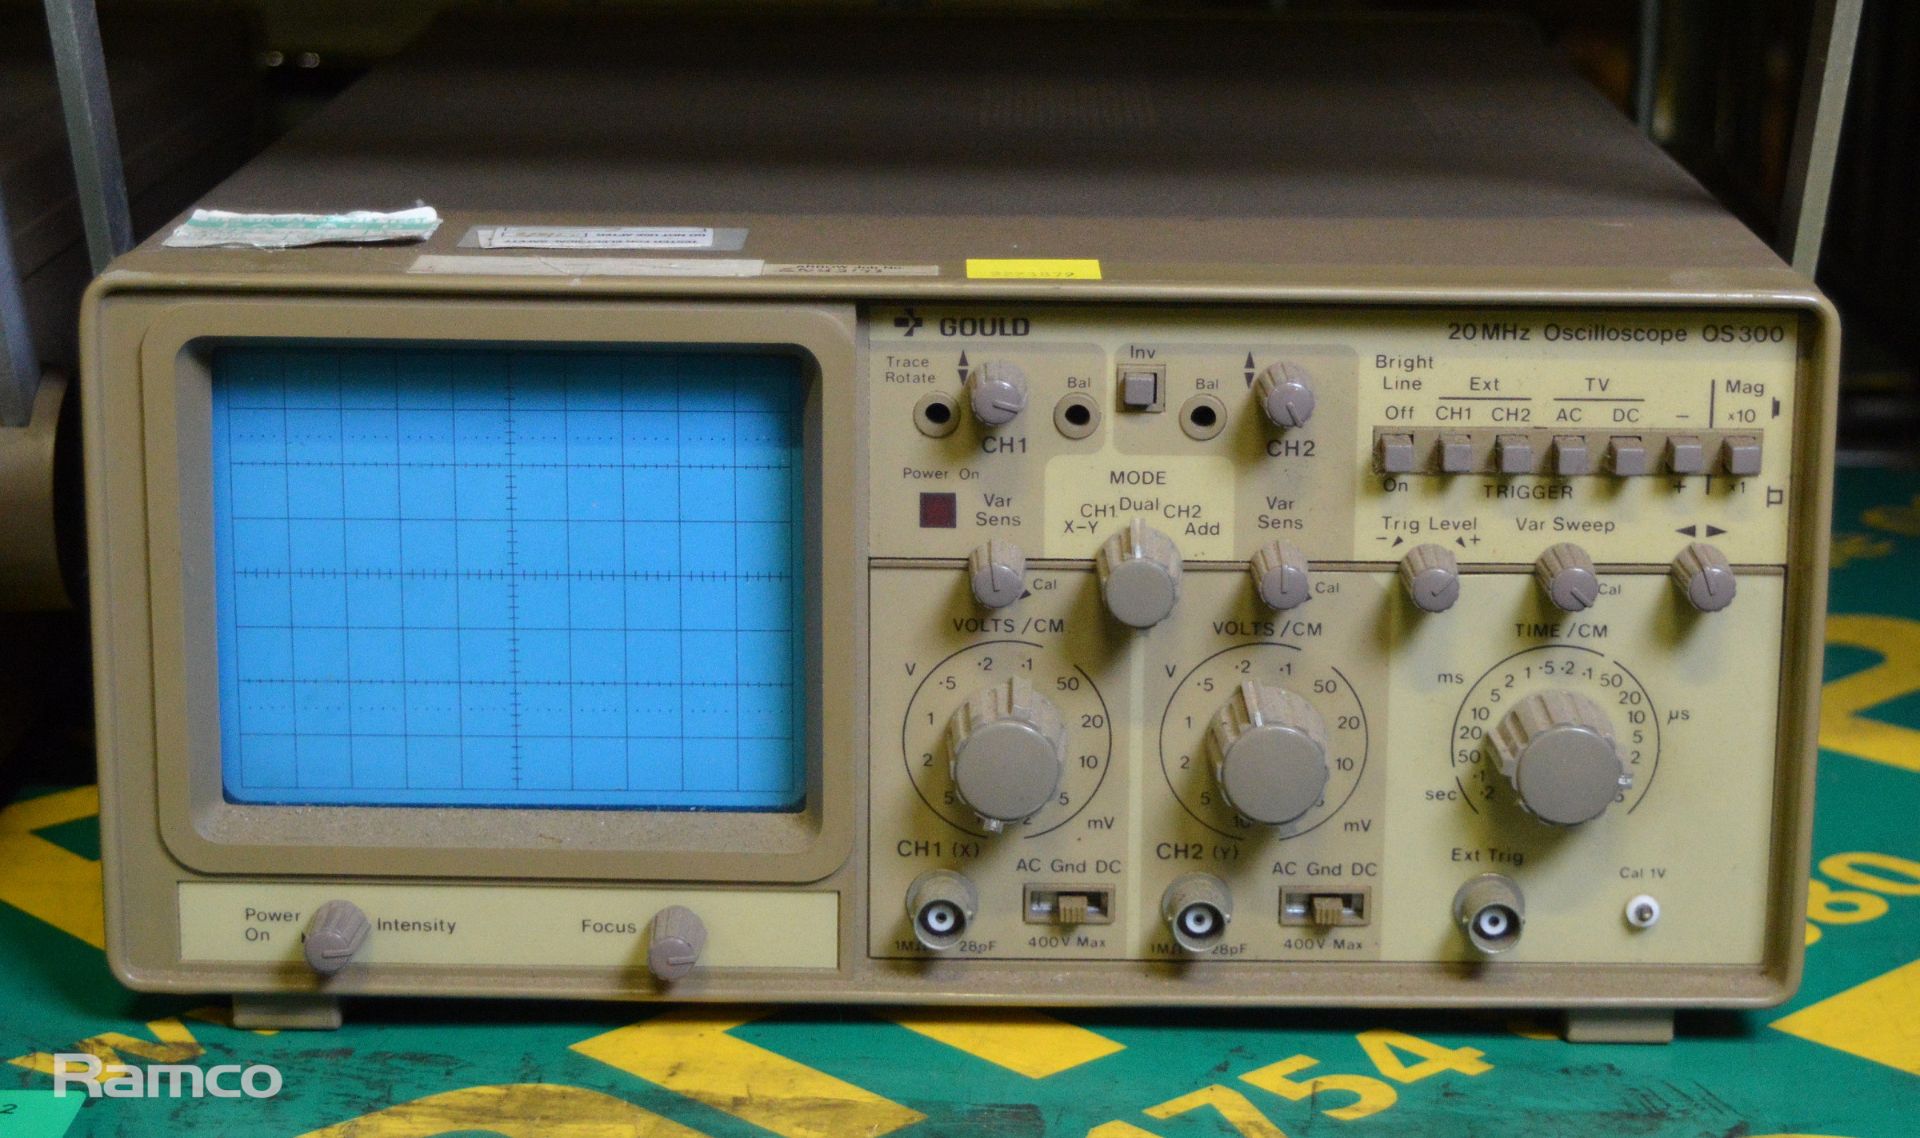 2x Gould 20MHz Oscilloscope OS300 - Image 3 of 3